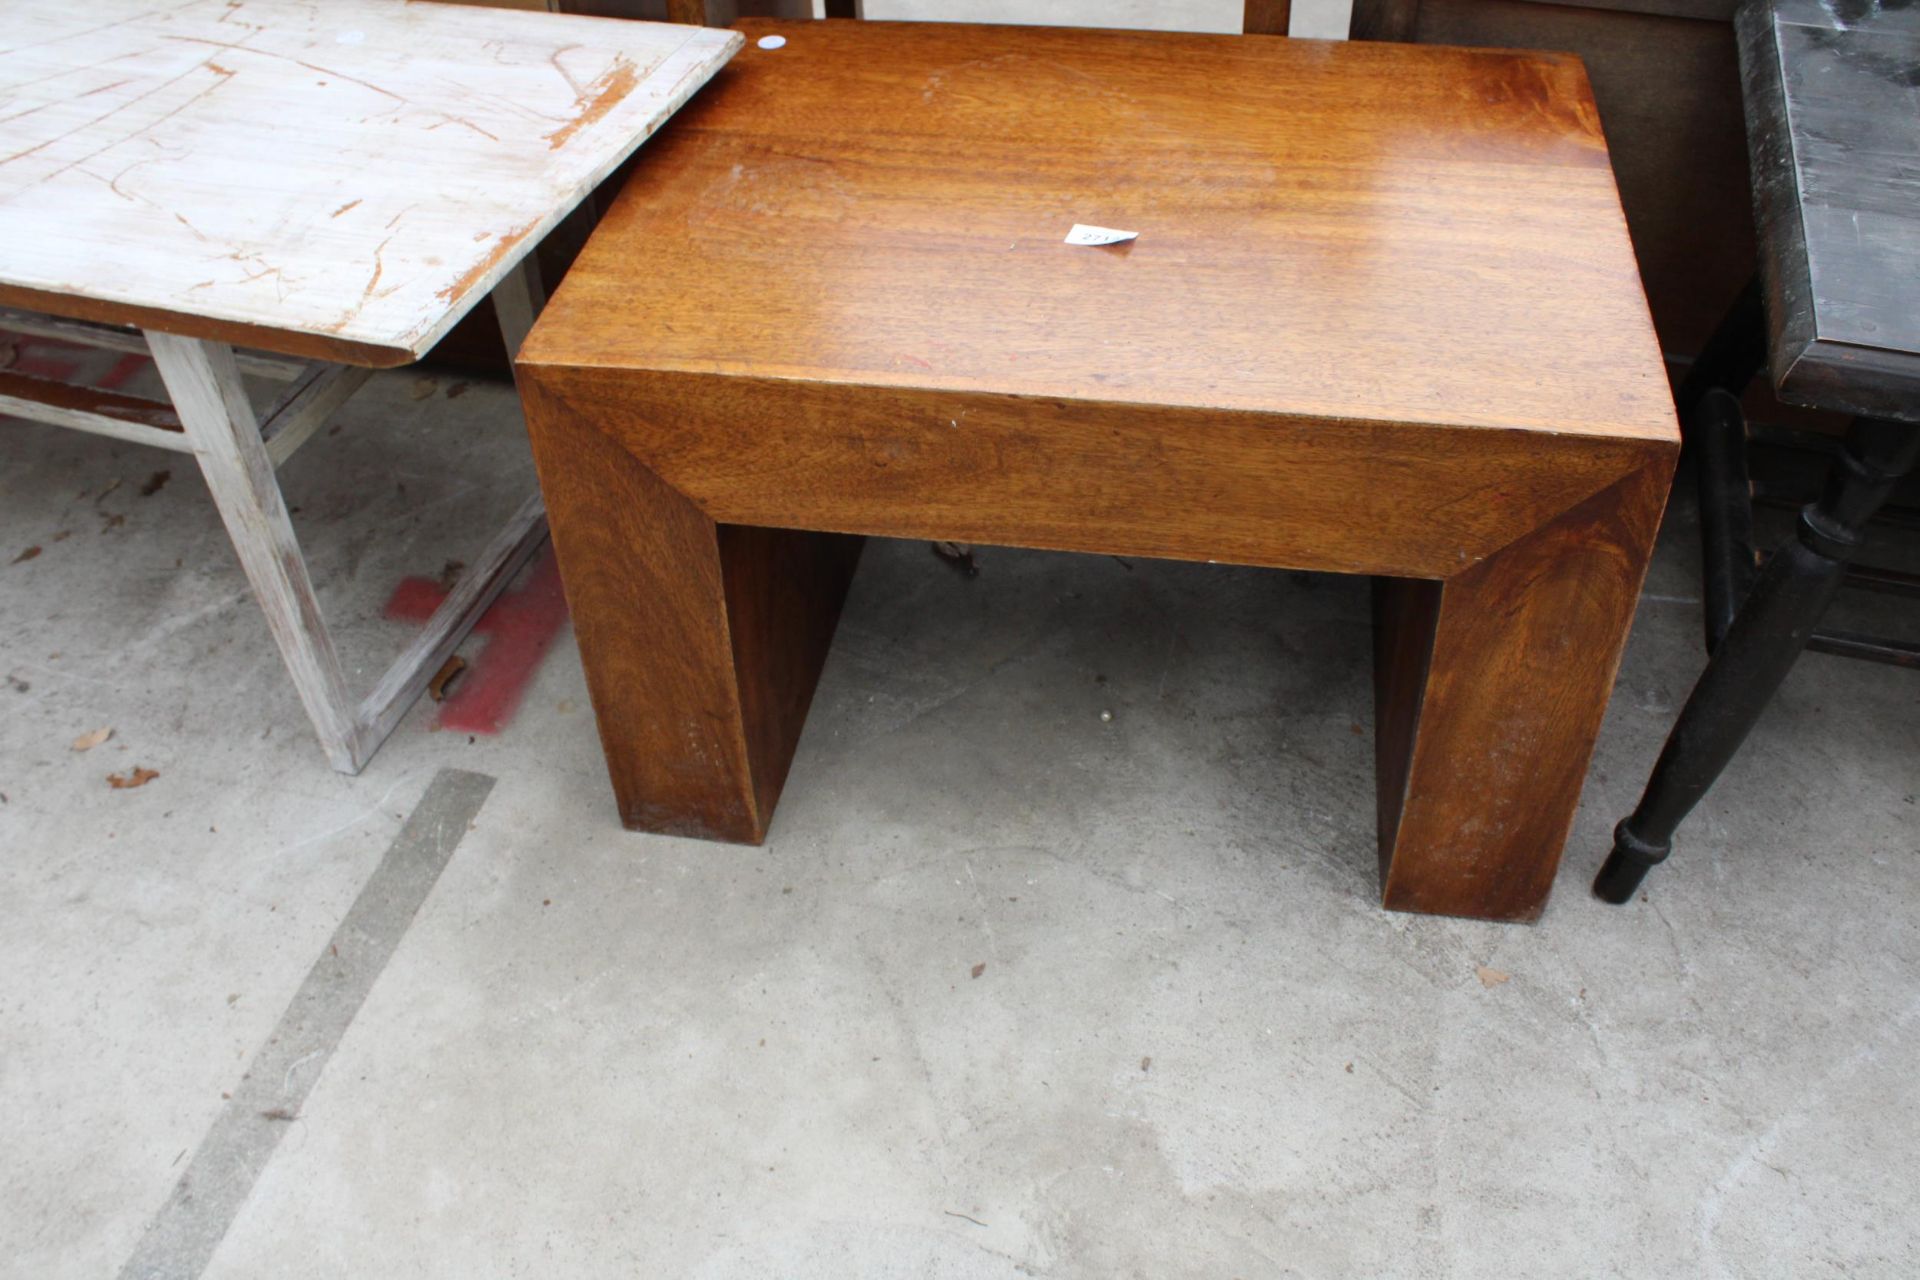 A HARDWOOD LAMP TABLE, RETRO TEAK COFFEE TABLE BY PLEASING FURNITURE (PYE FRANKLIN) AND A SMALL - Image 2 of 4